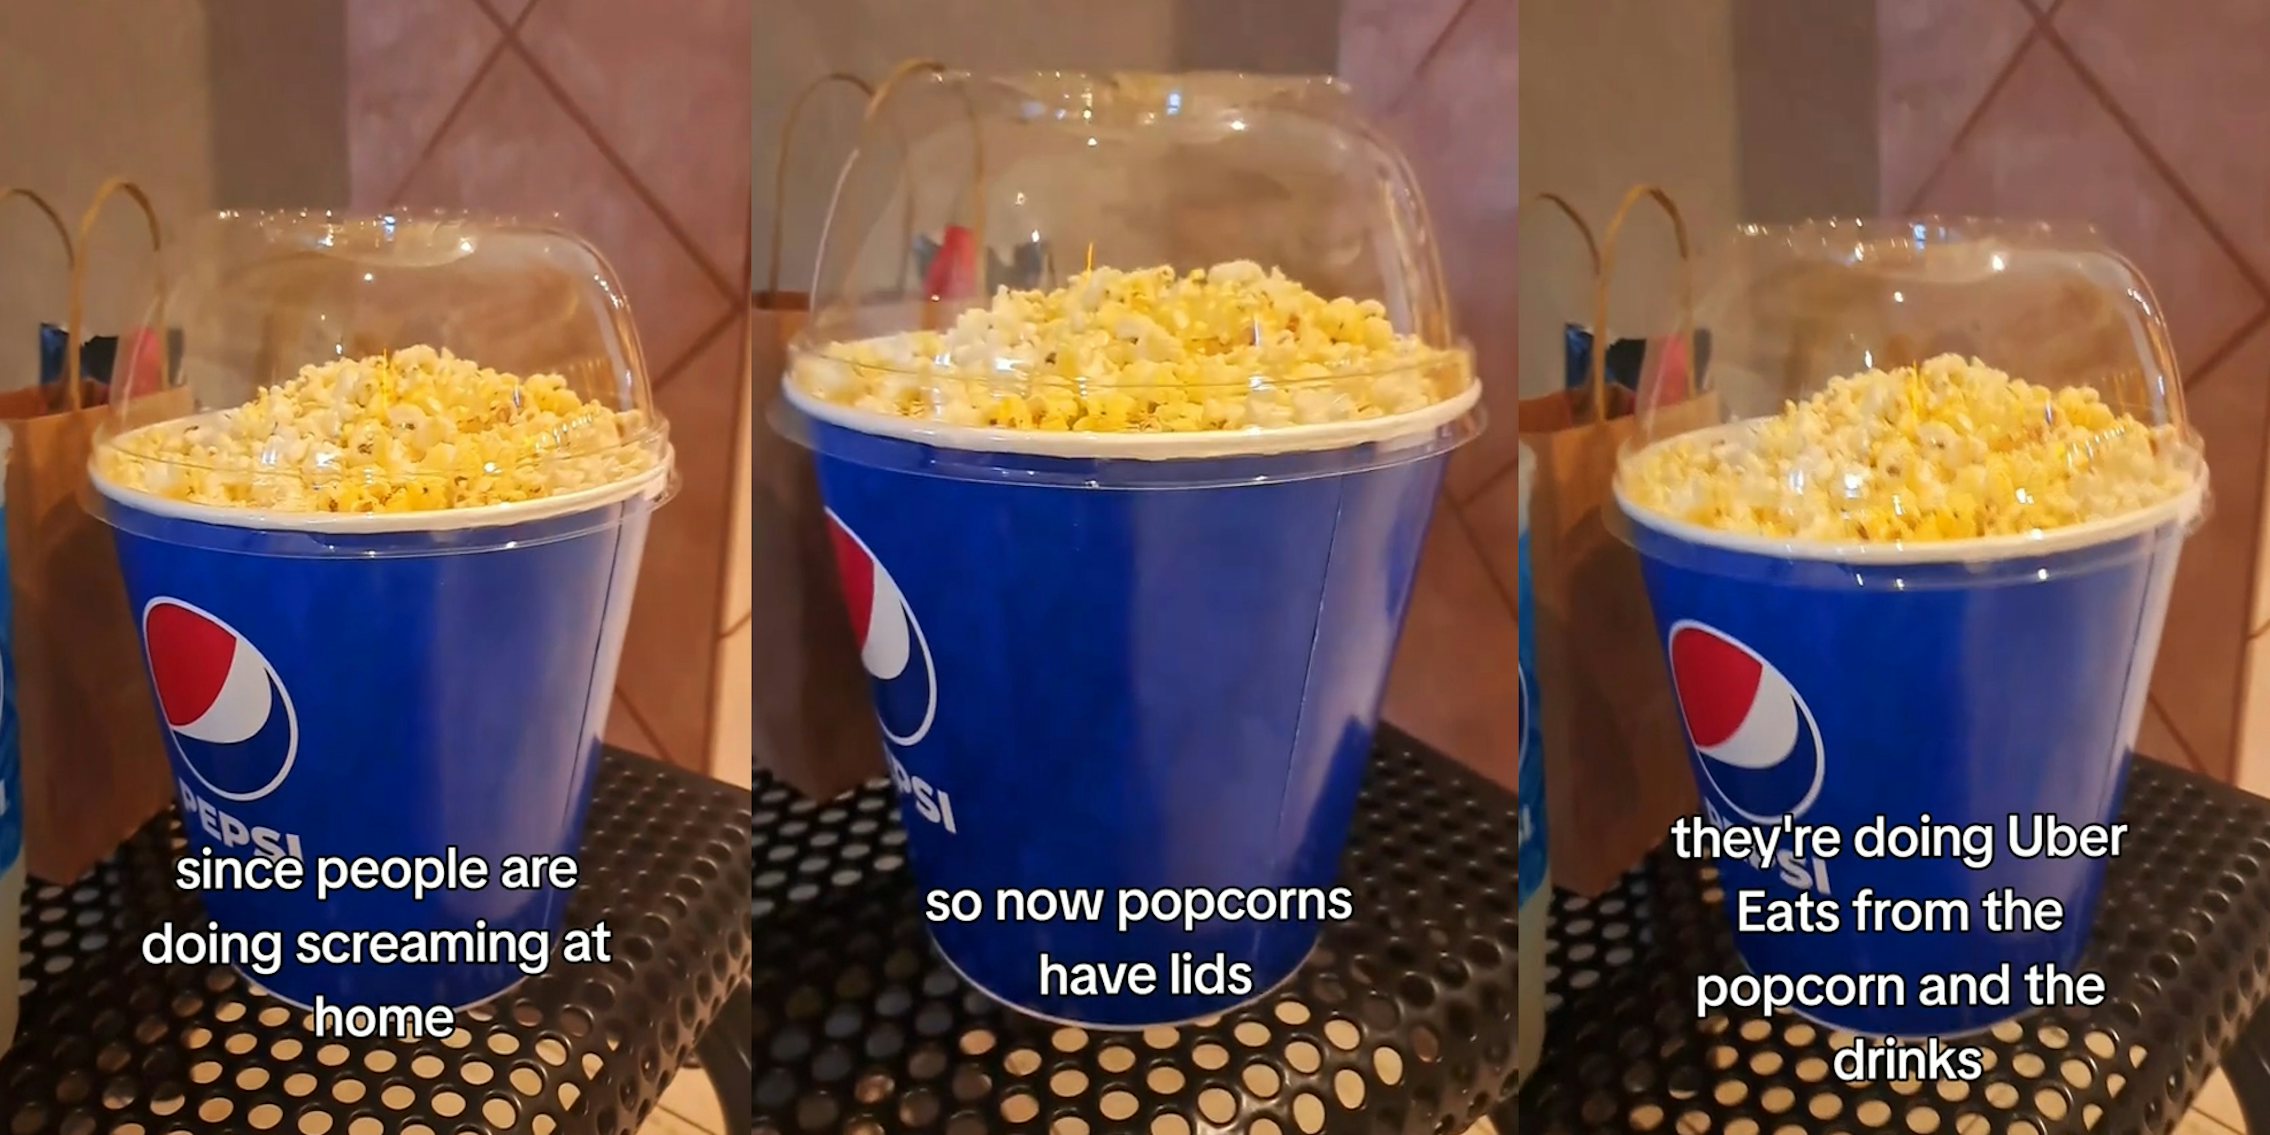 movie theater popcorn container filled with lid on top with caption 'since people are doing screaming at home' (l) movie theater popcorn container filled with lid on top with caption 'so now popcorns have lids' (c) movie theater popcorn container filled with lid on top with caption 'They're doing Uber Eats from the popcorn and the drinks' (r)